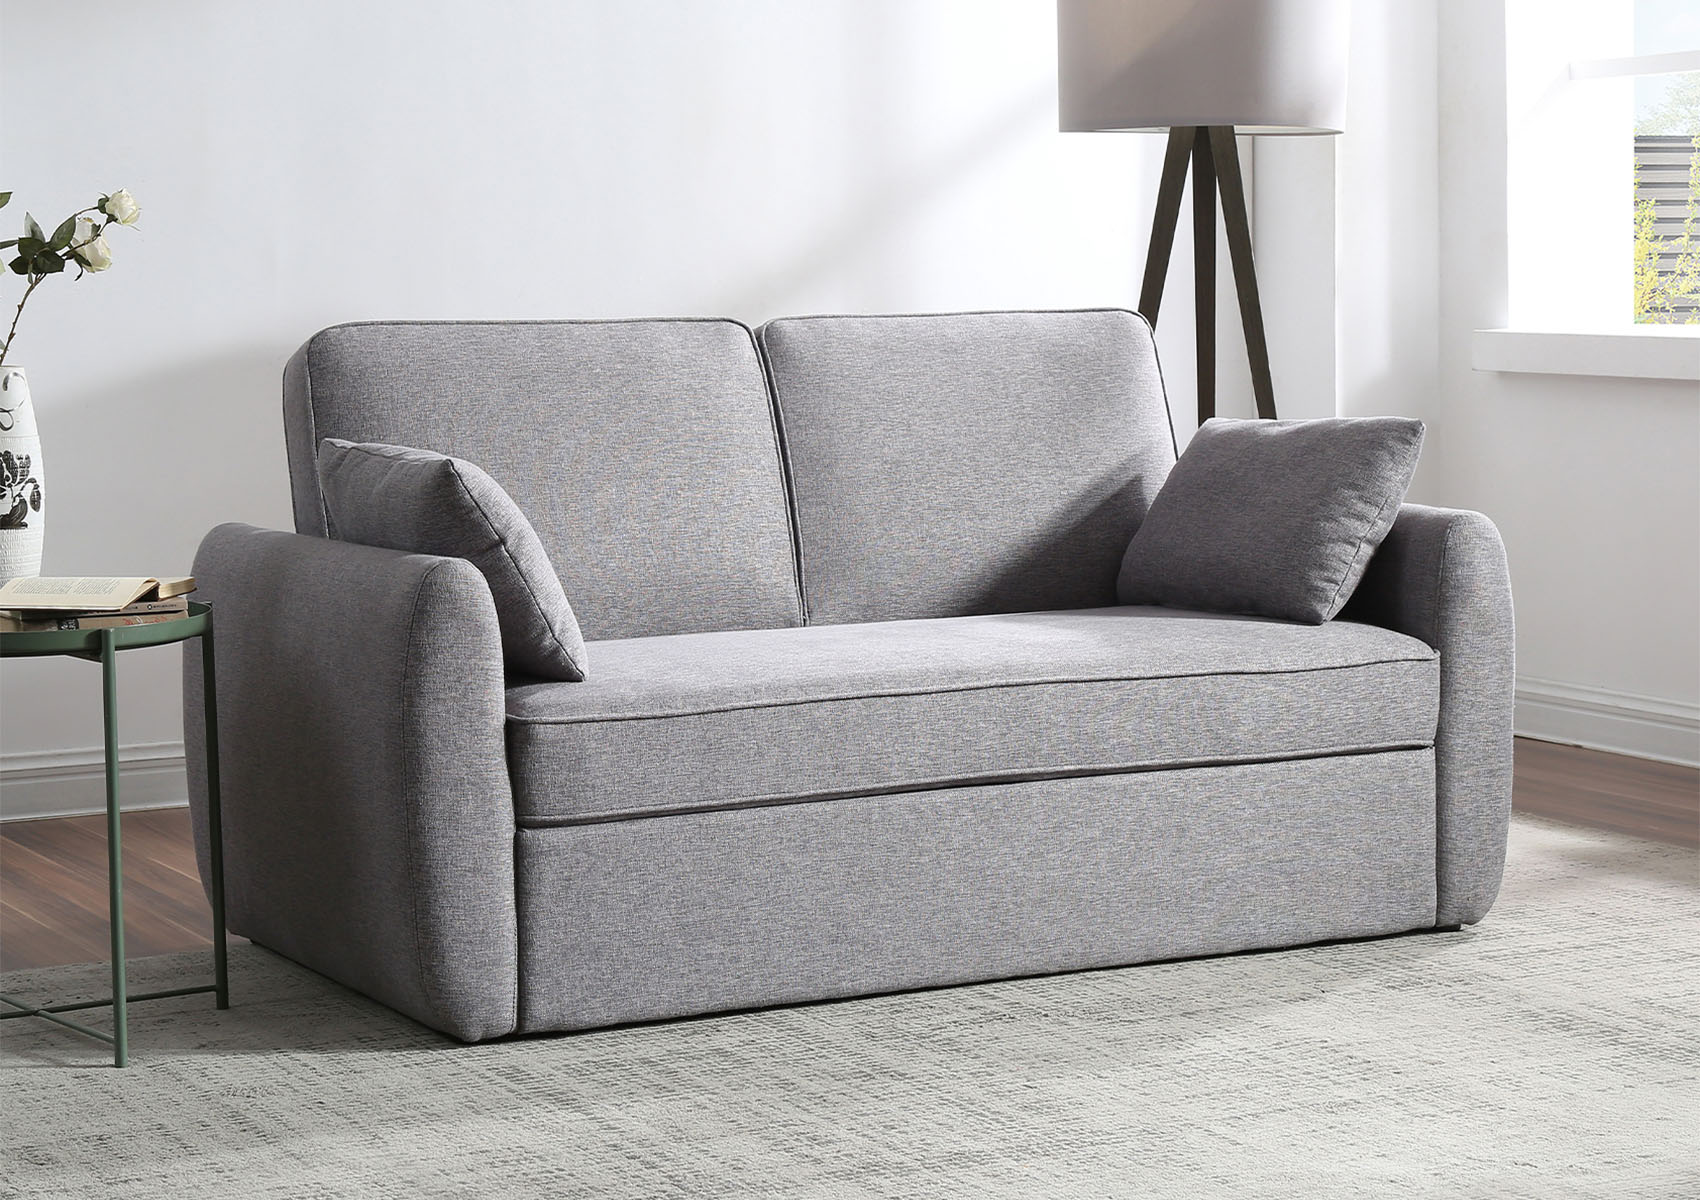 View Solace Grey Sofa Bed Time4Sleep information